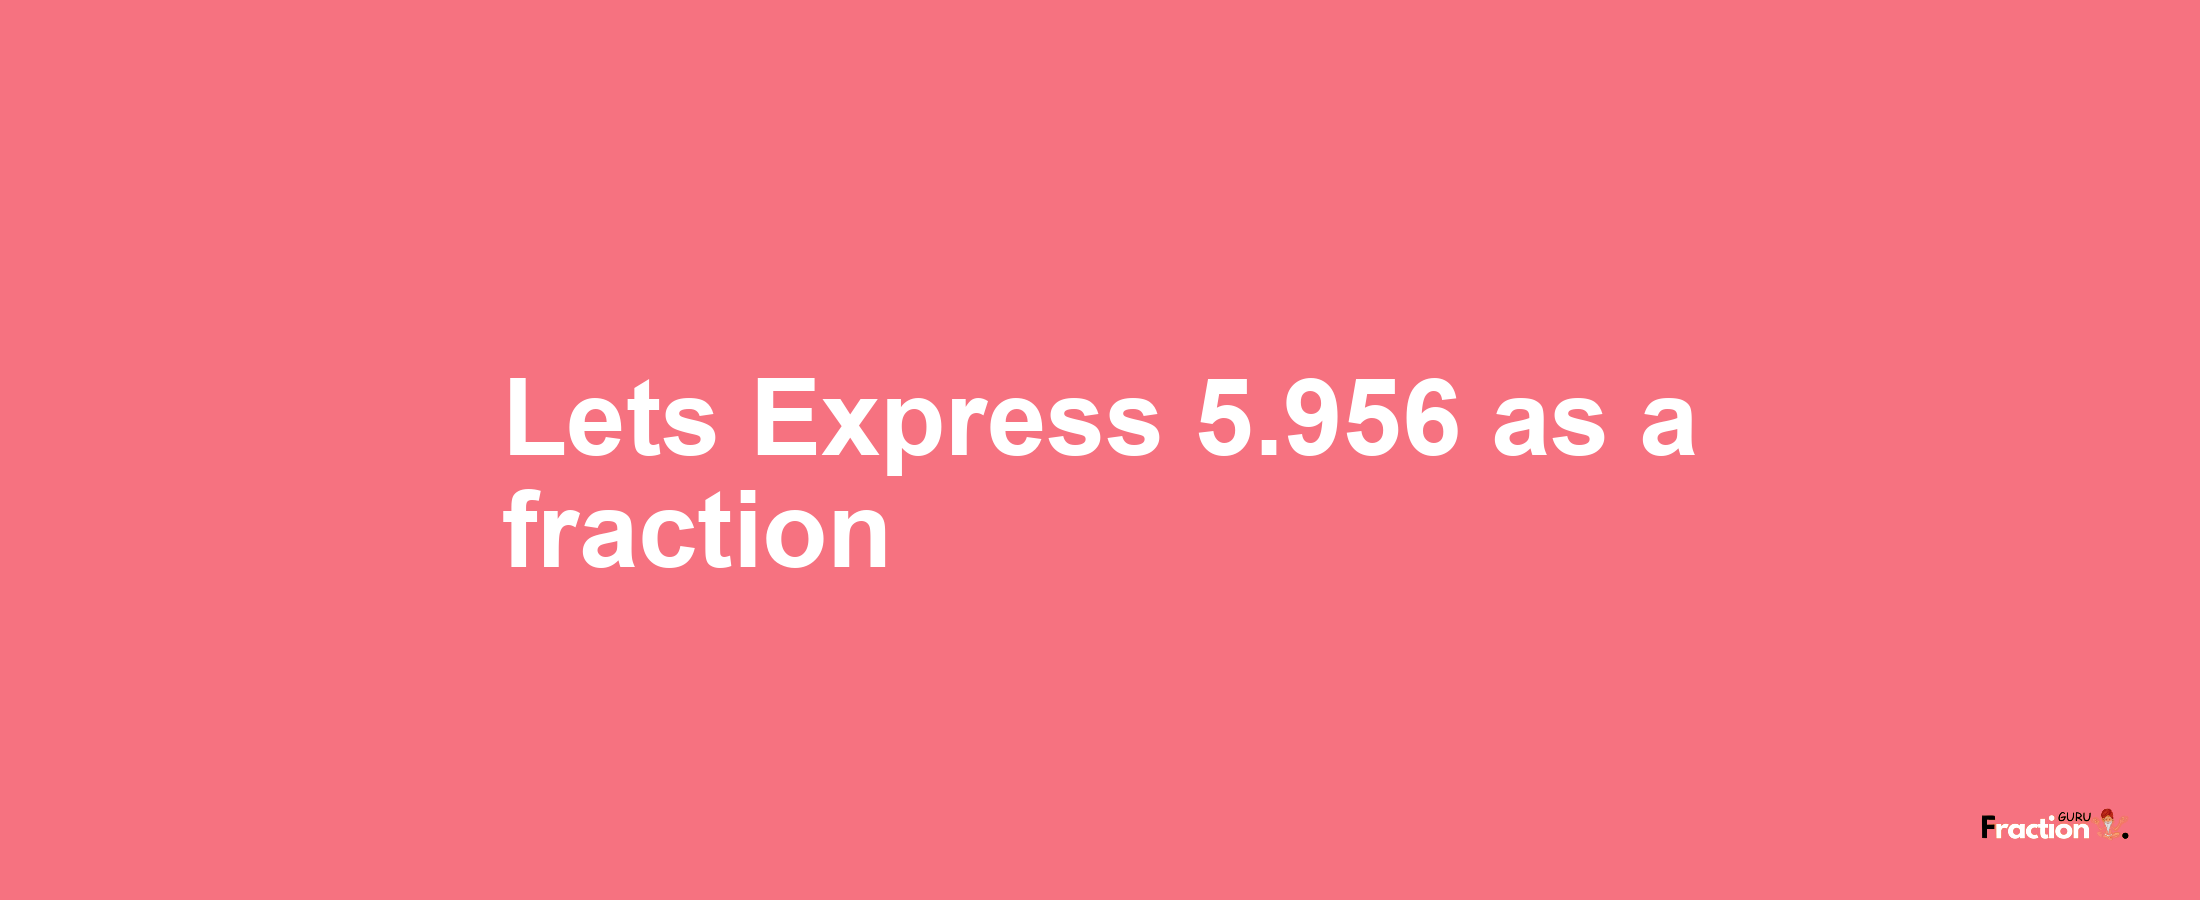 Lets Express 5.956 as afraction